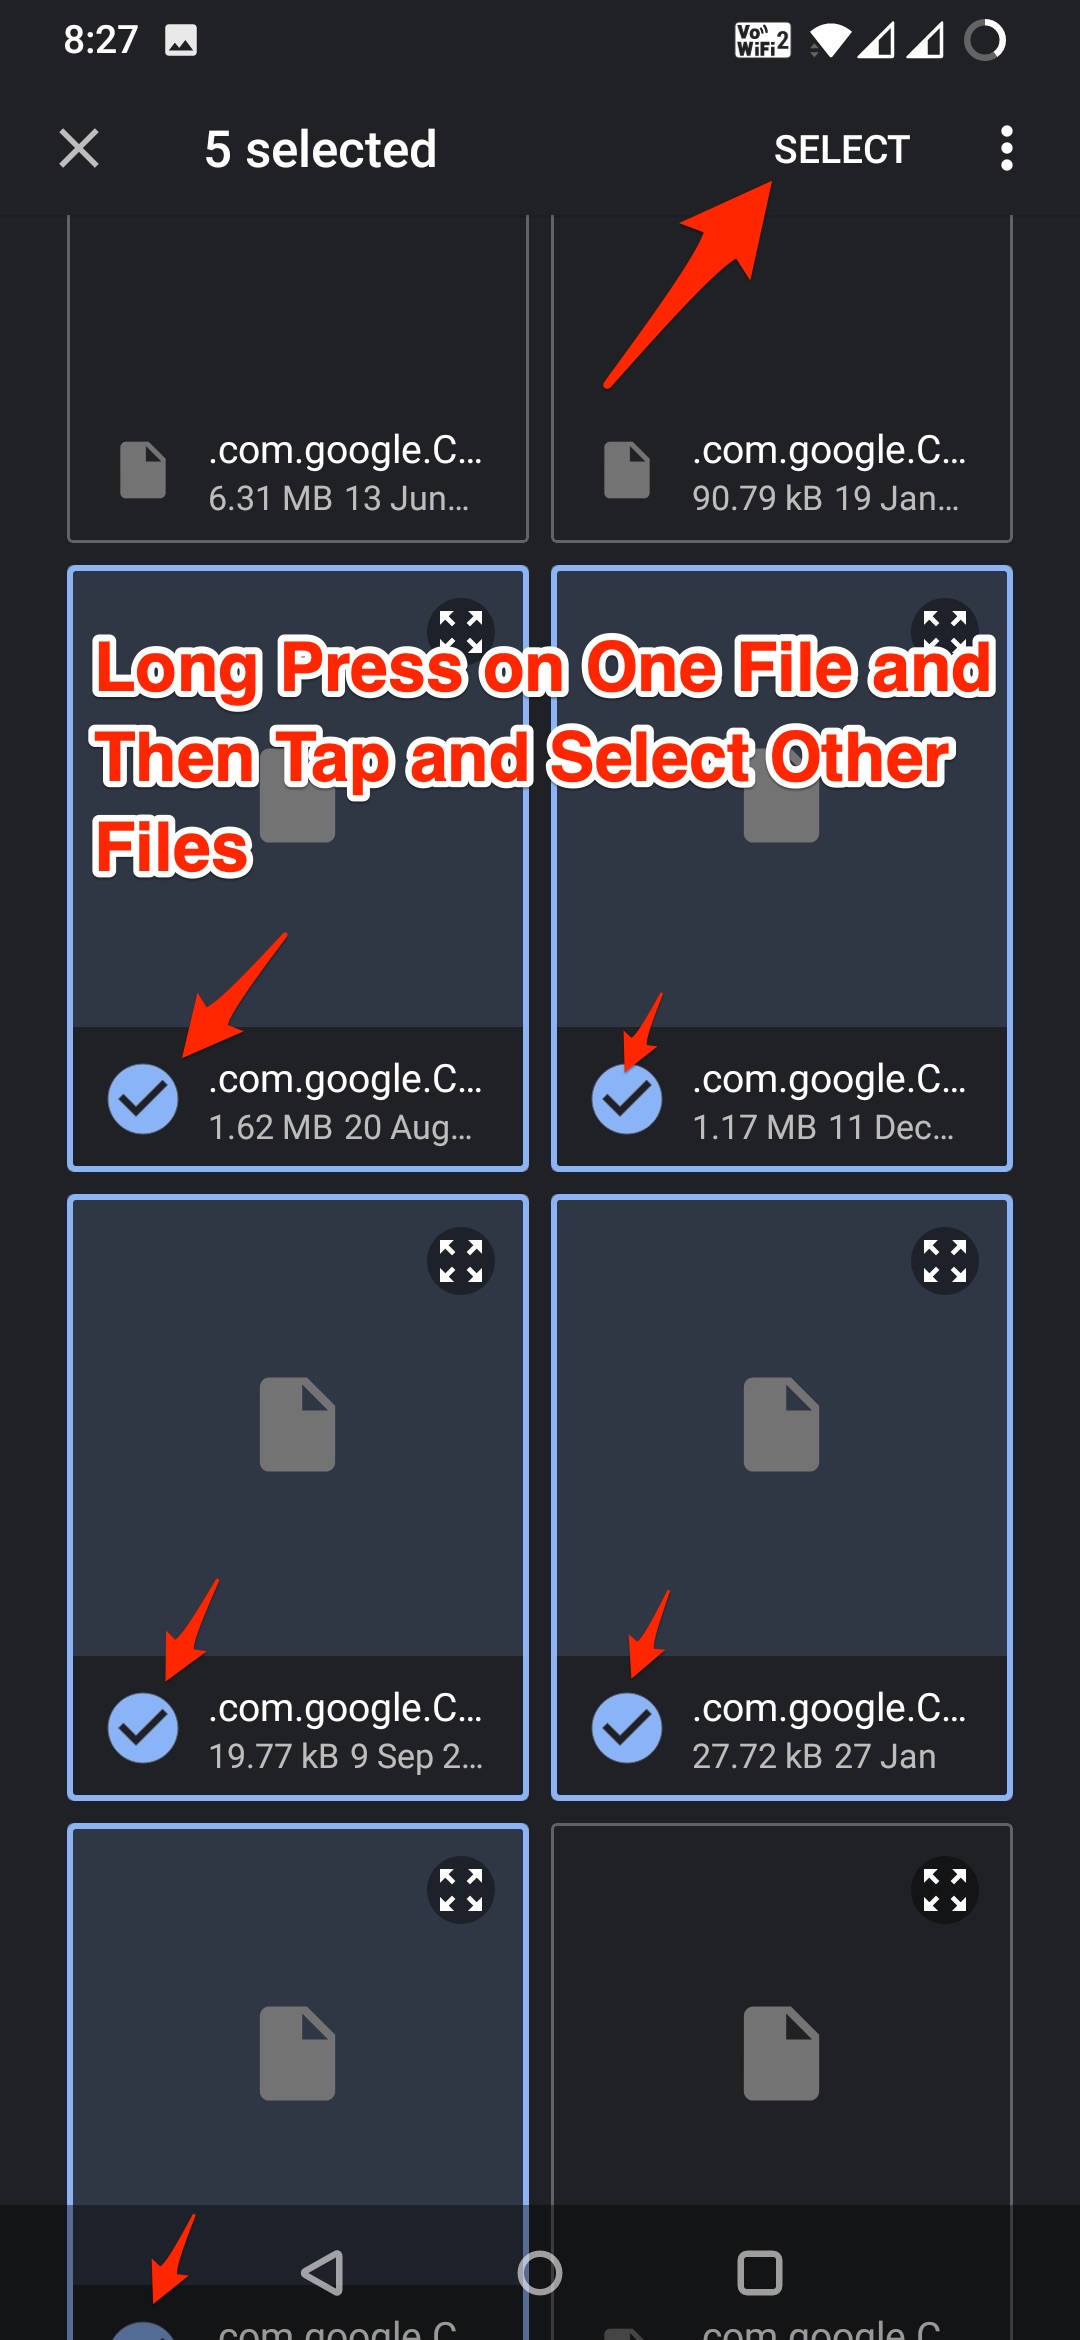 Long_Press_on_One_File_and_Then_Tap_and_Select_Other_Files